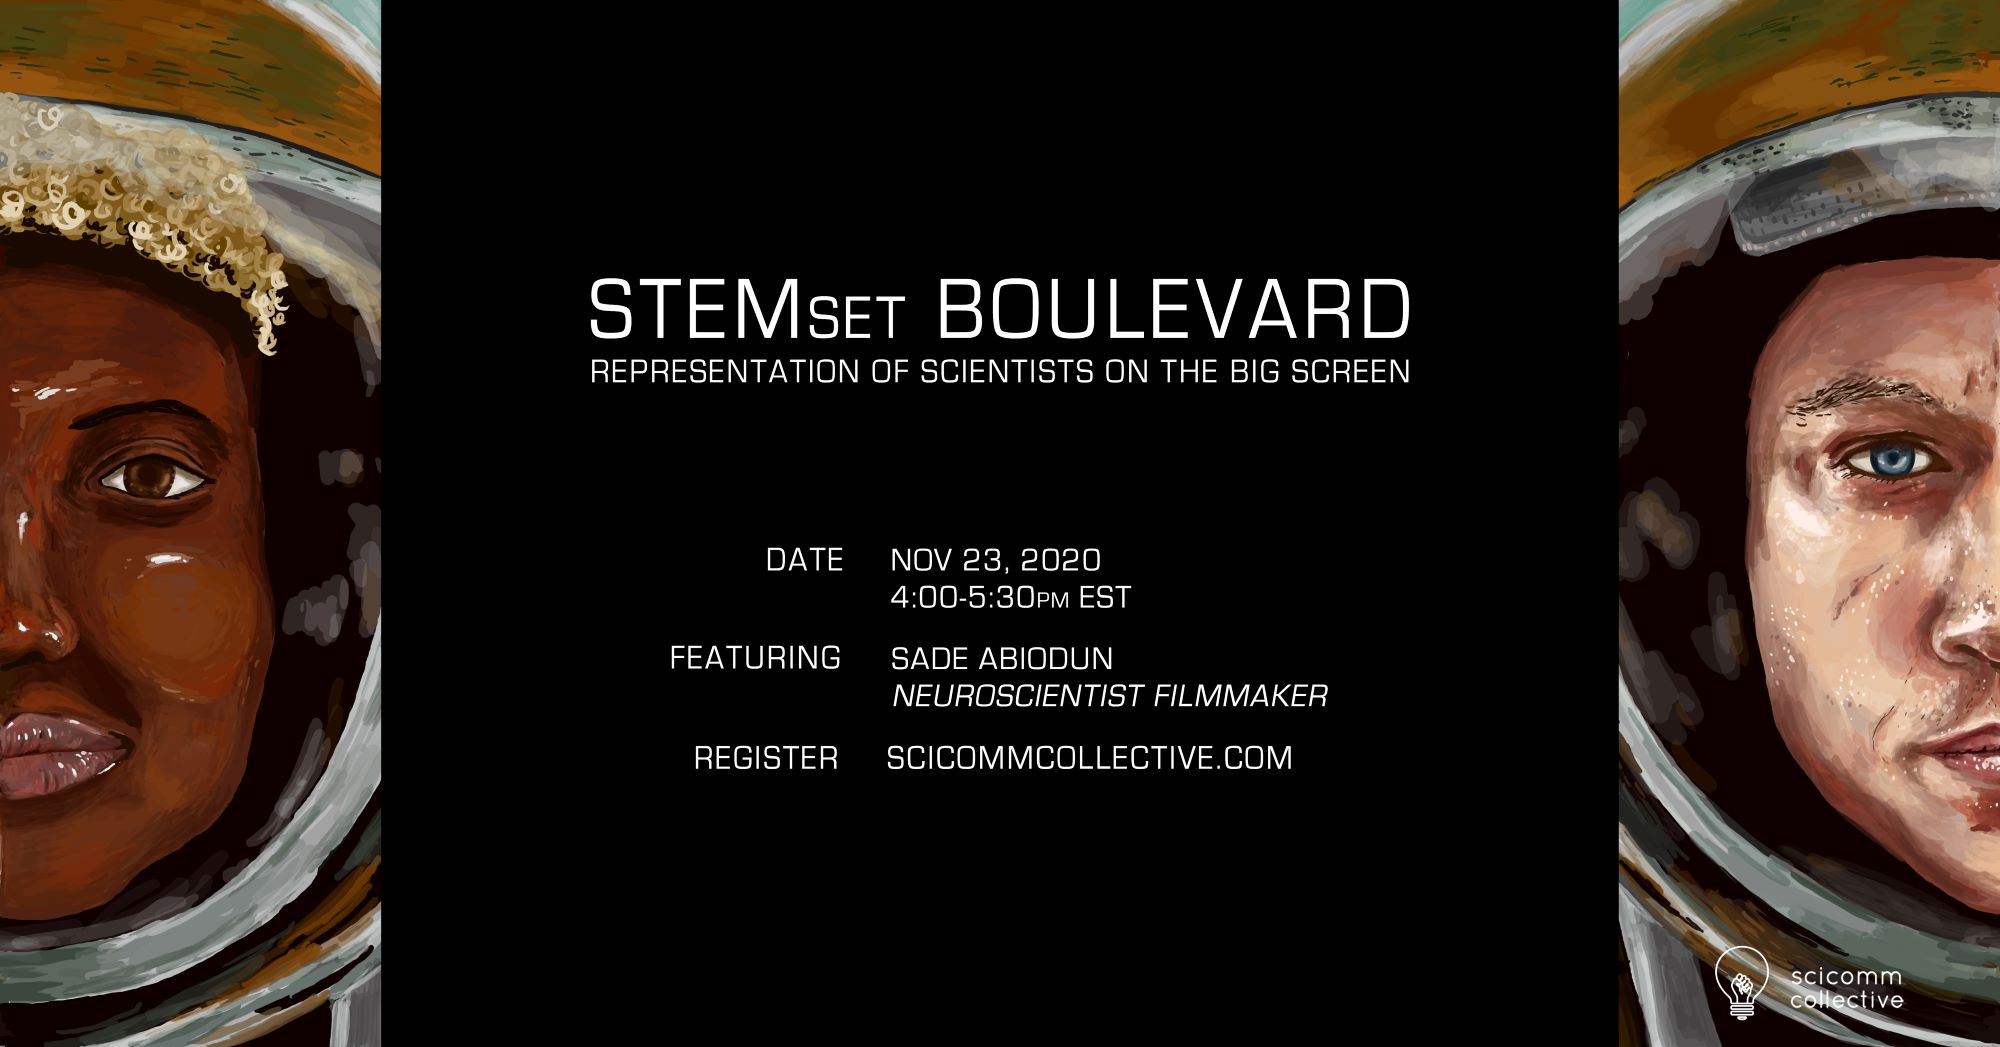 STEMSet Boulevard: Representation of Scientists on the Big Screen